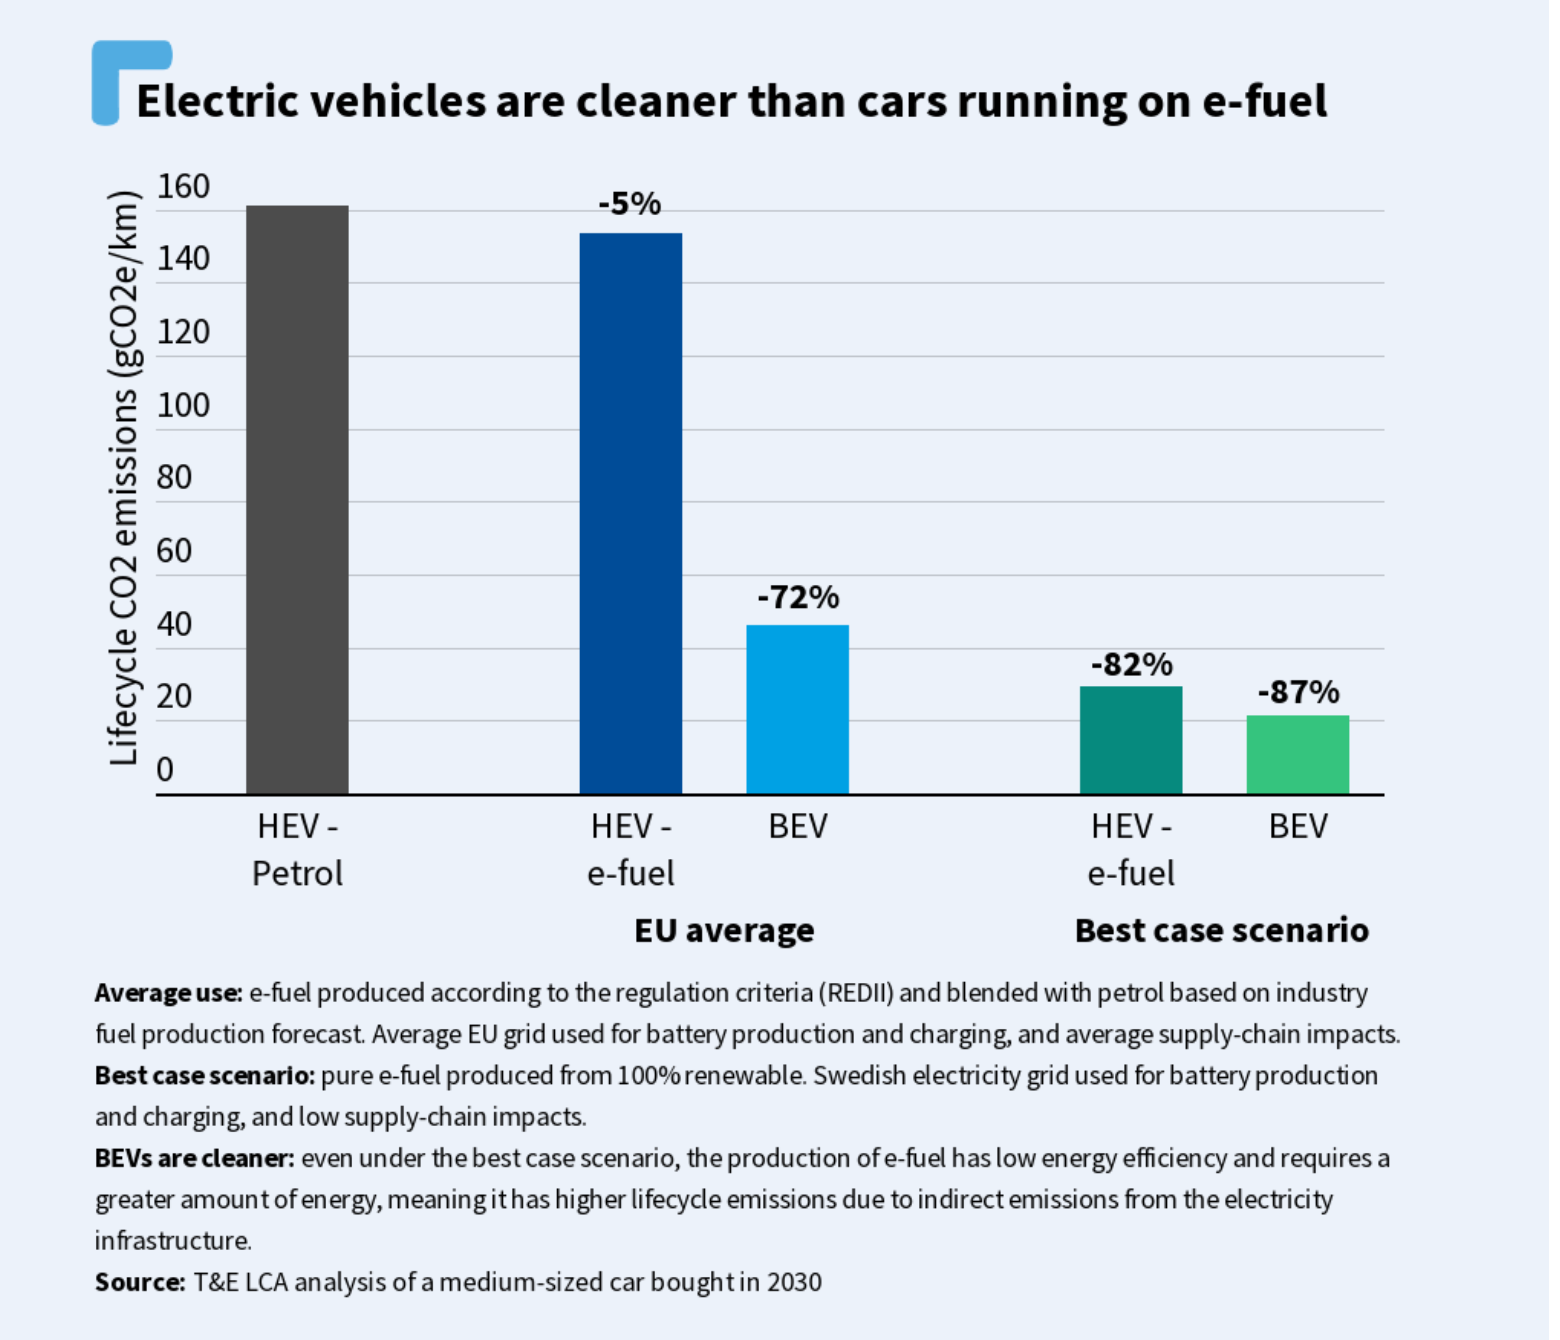 Unf**king the Climate - Part 4: Electric Cars, Good or Bad?